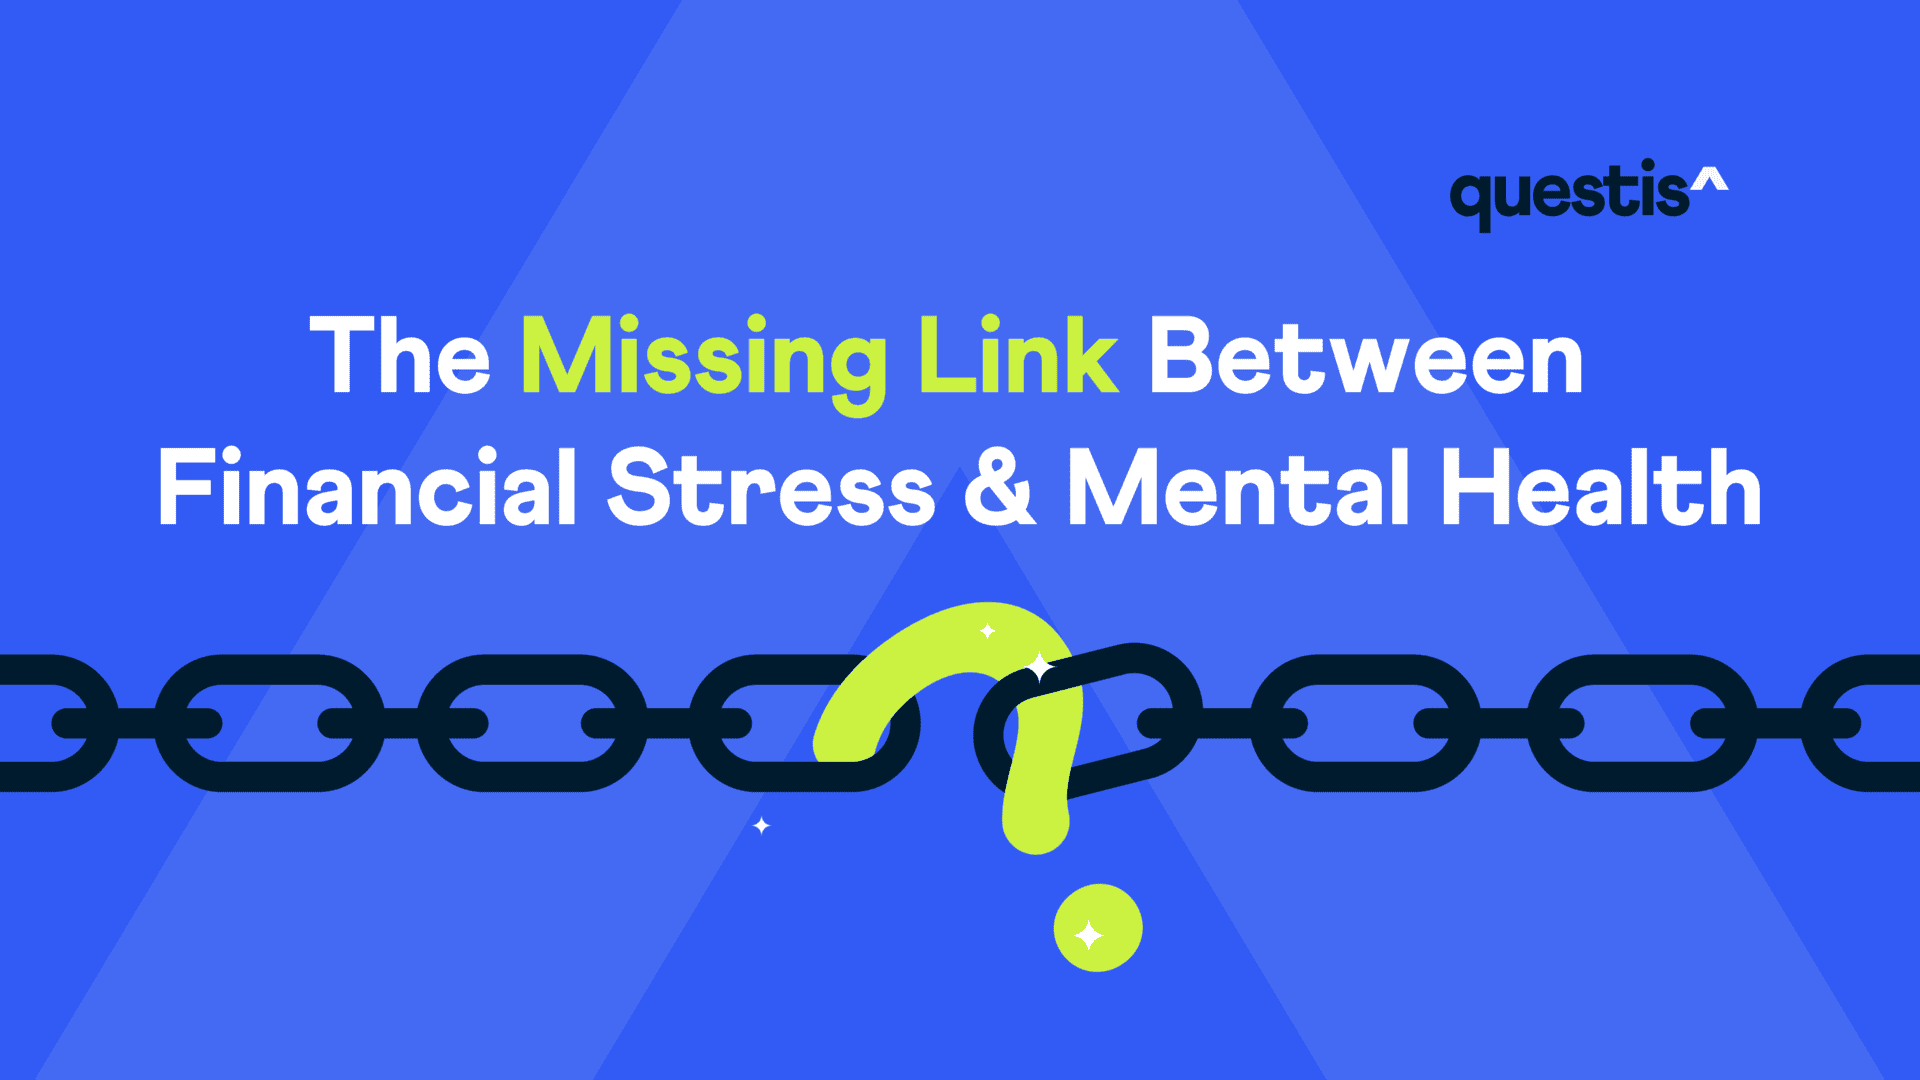 The Missing Link Between Financial Stress and Mental Health